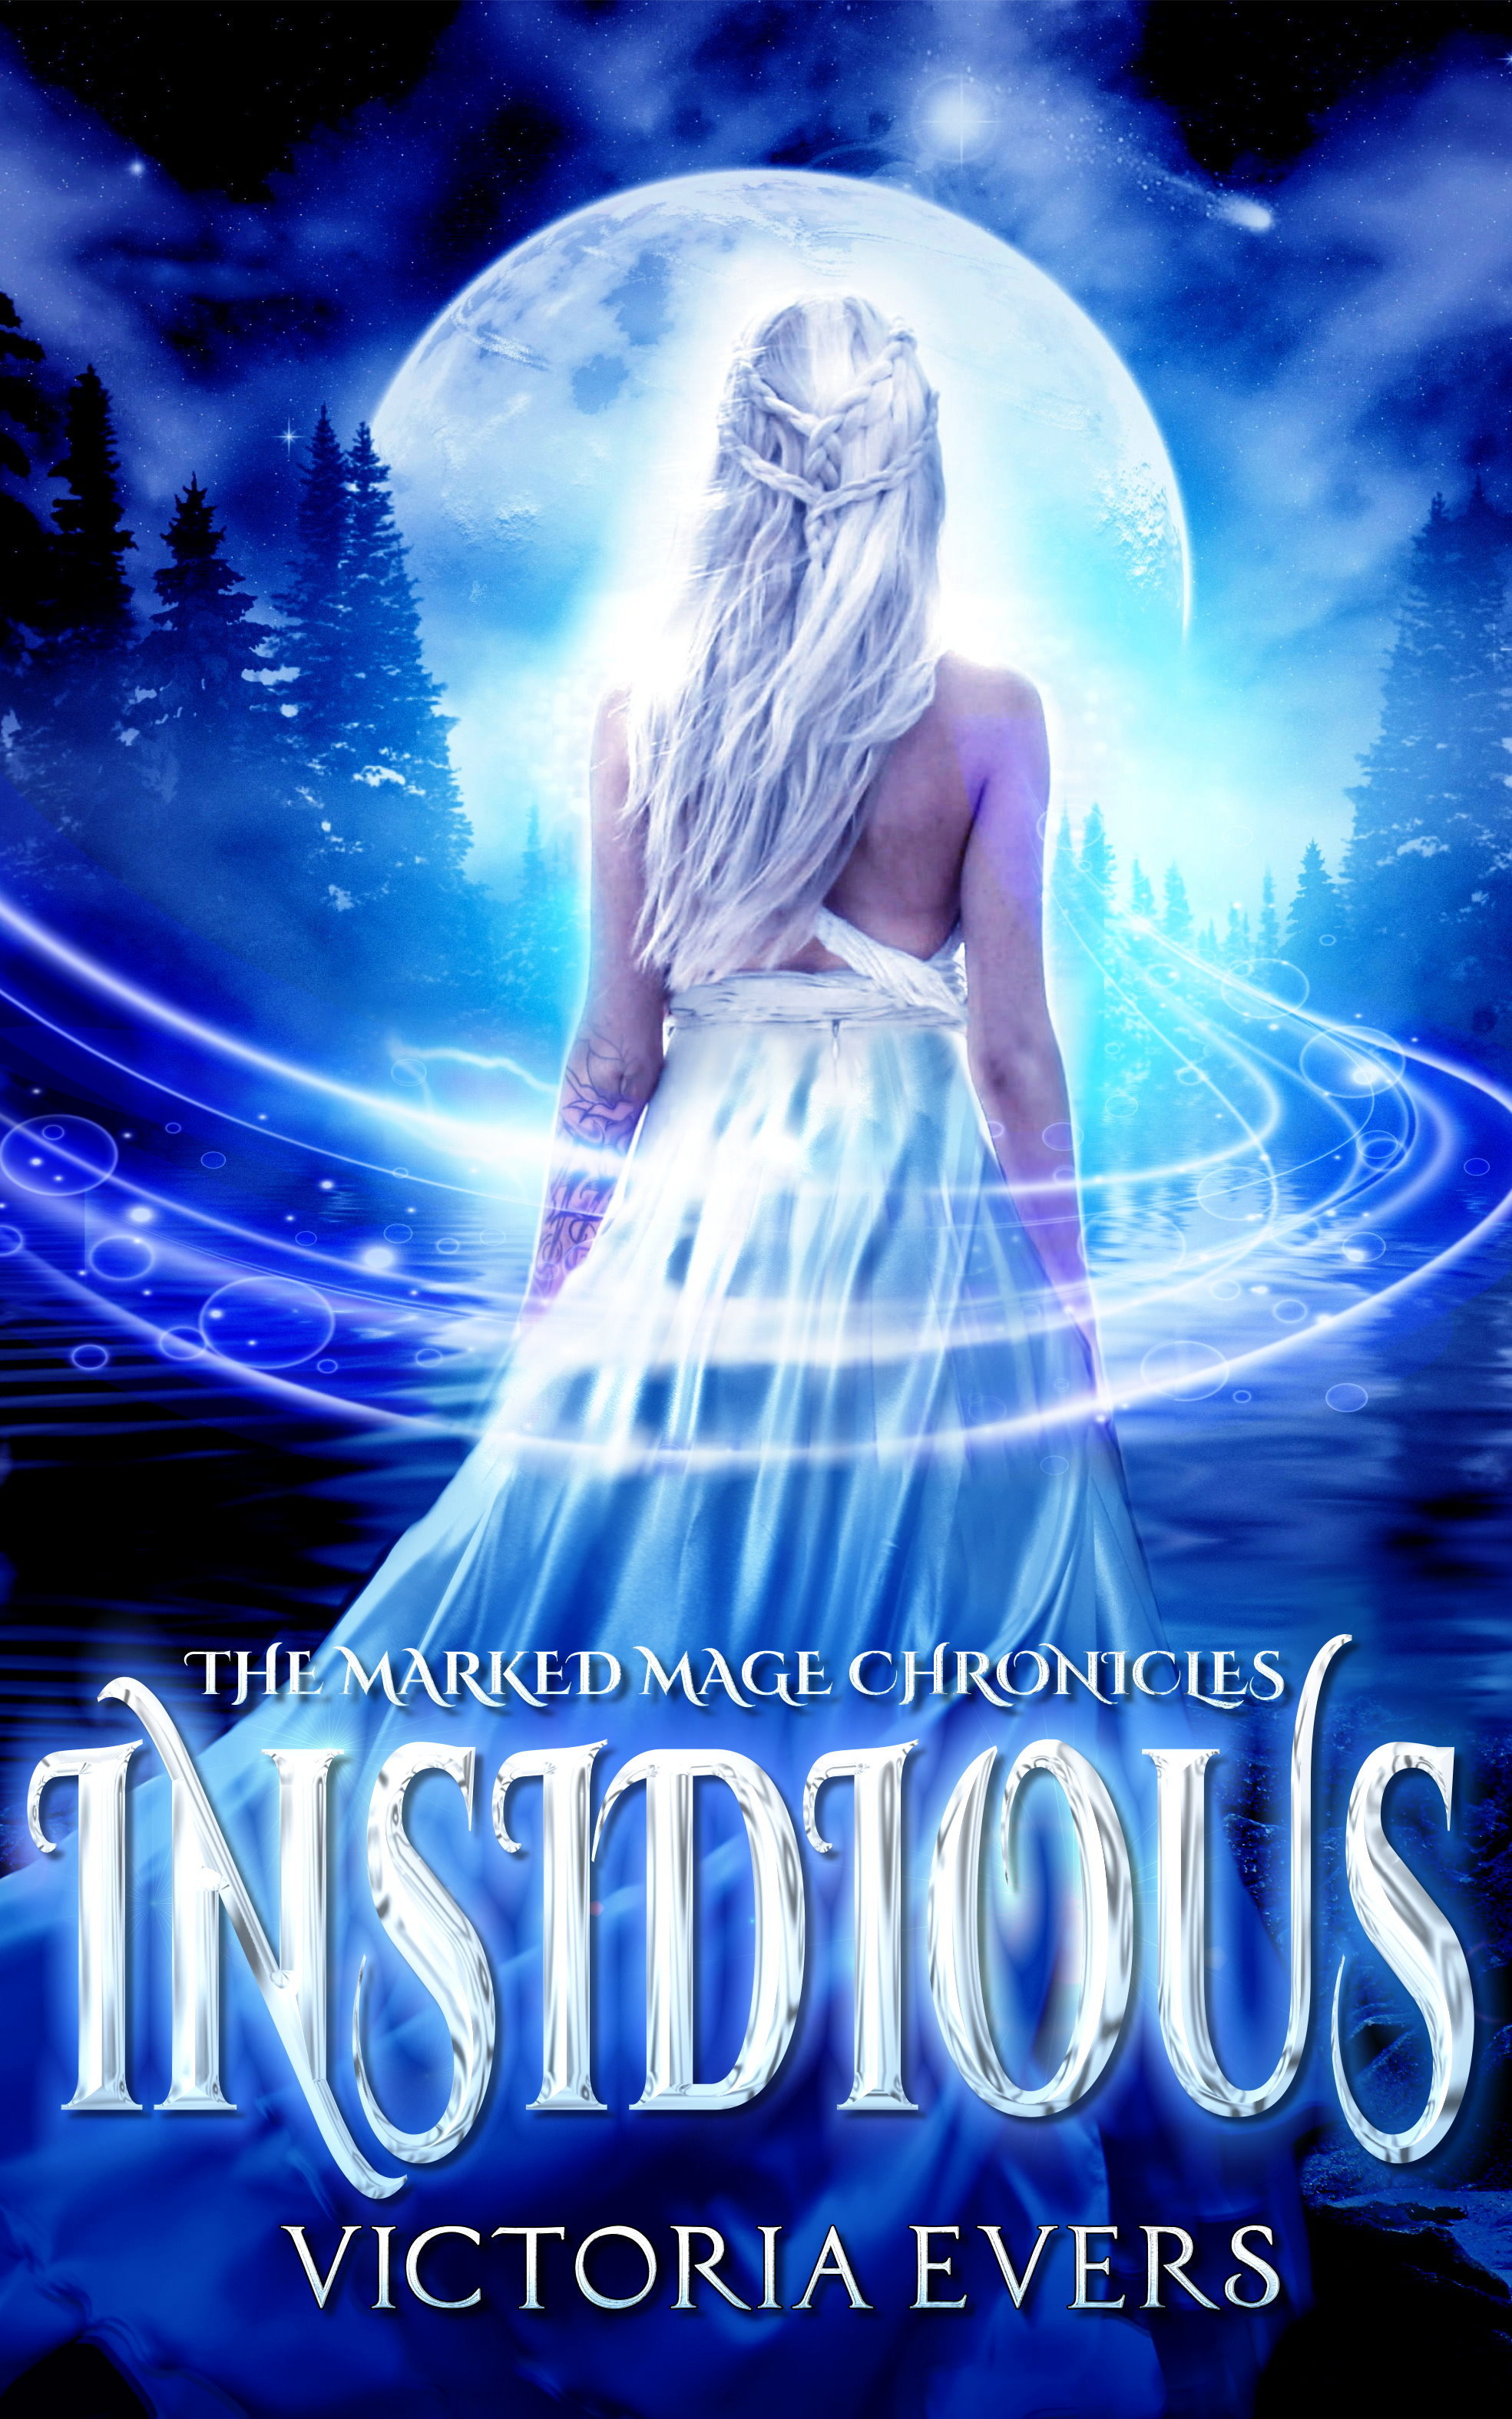 FREE: Insidious: An Urban Fantasy Romance (The Marked Mage Chronicles, Book 1) by Victoria Evers by Victoria Evers